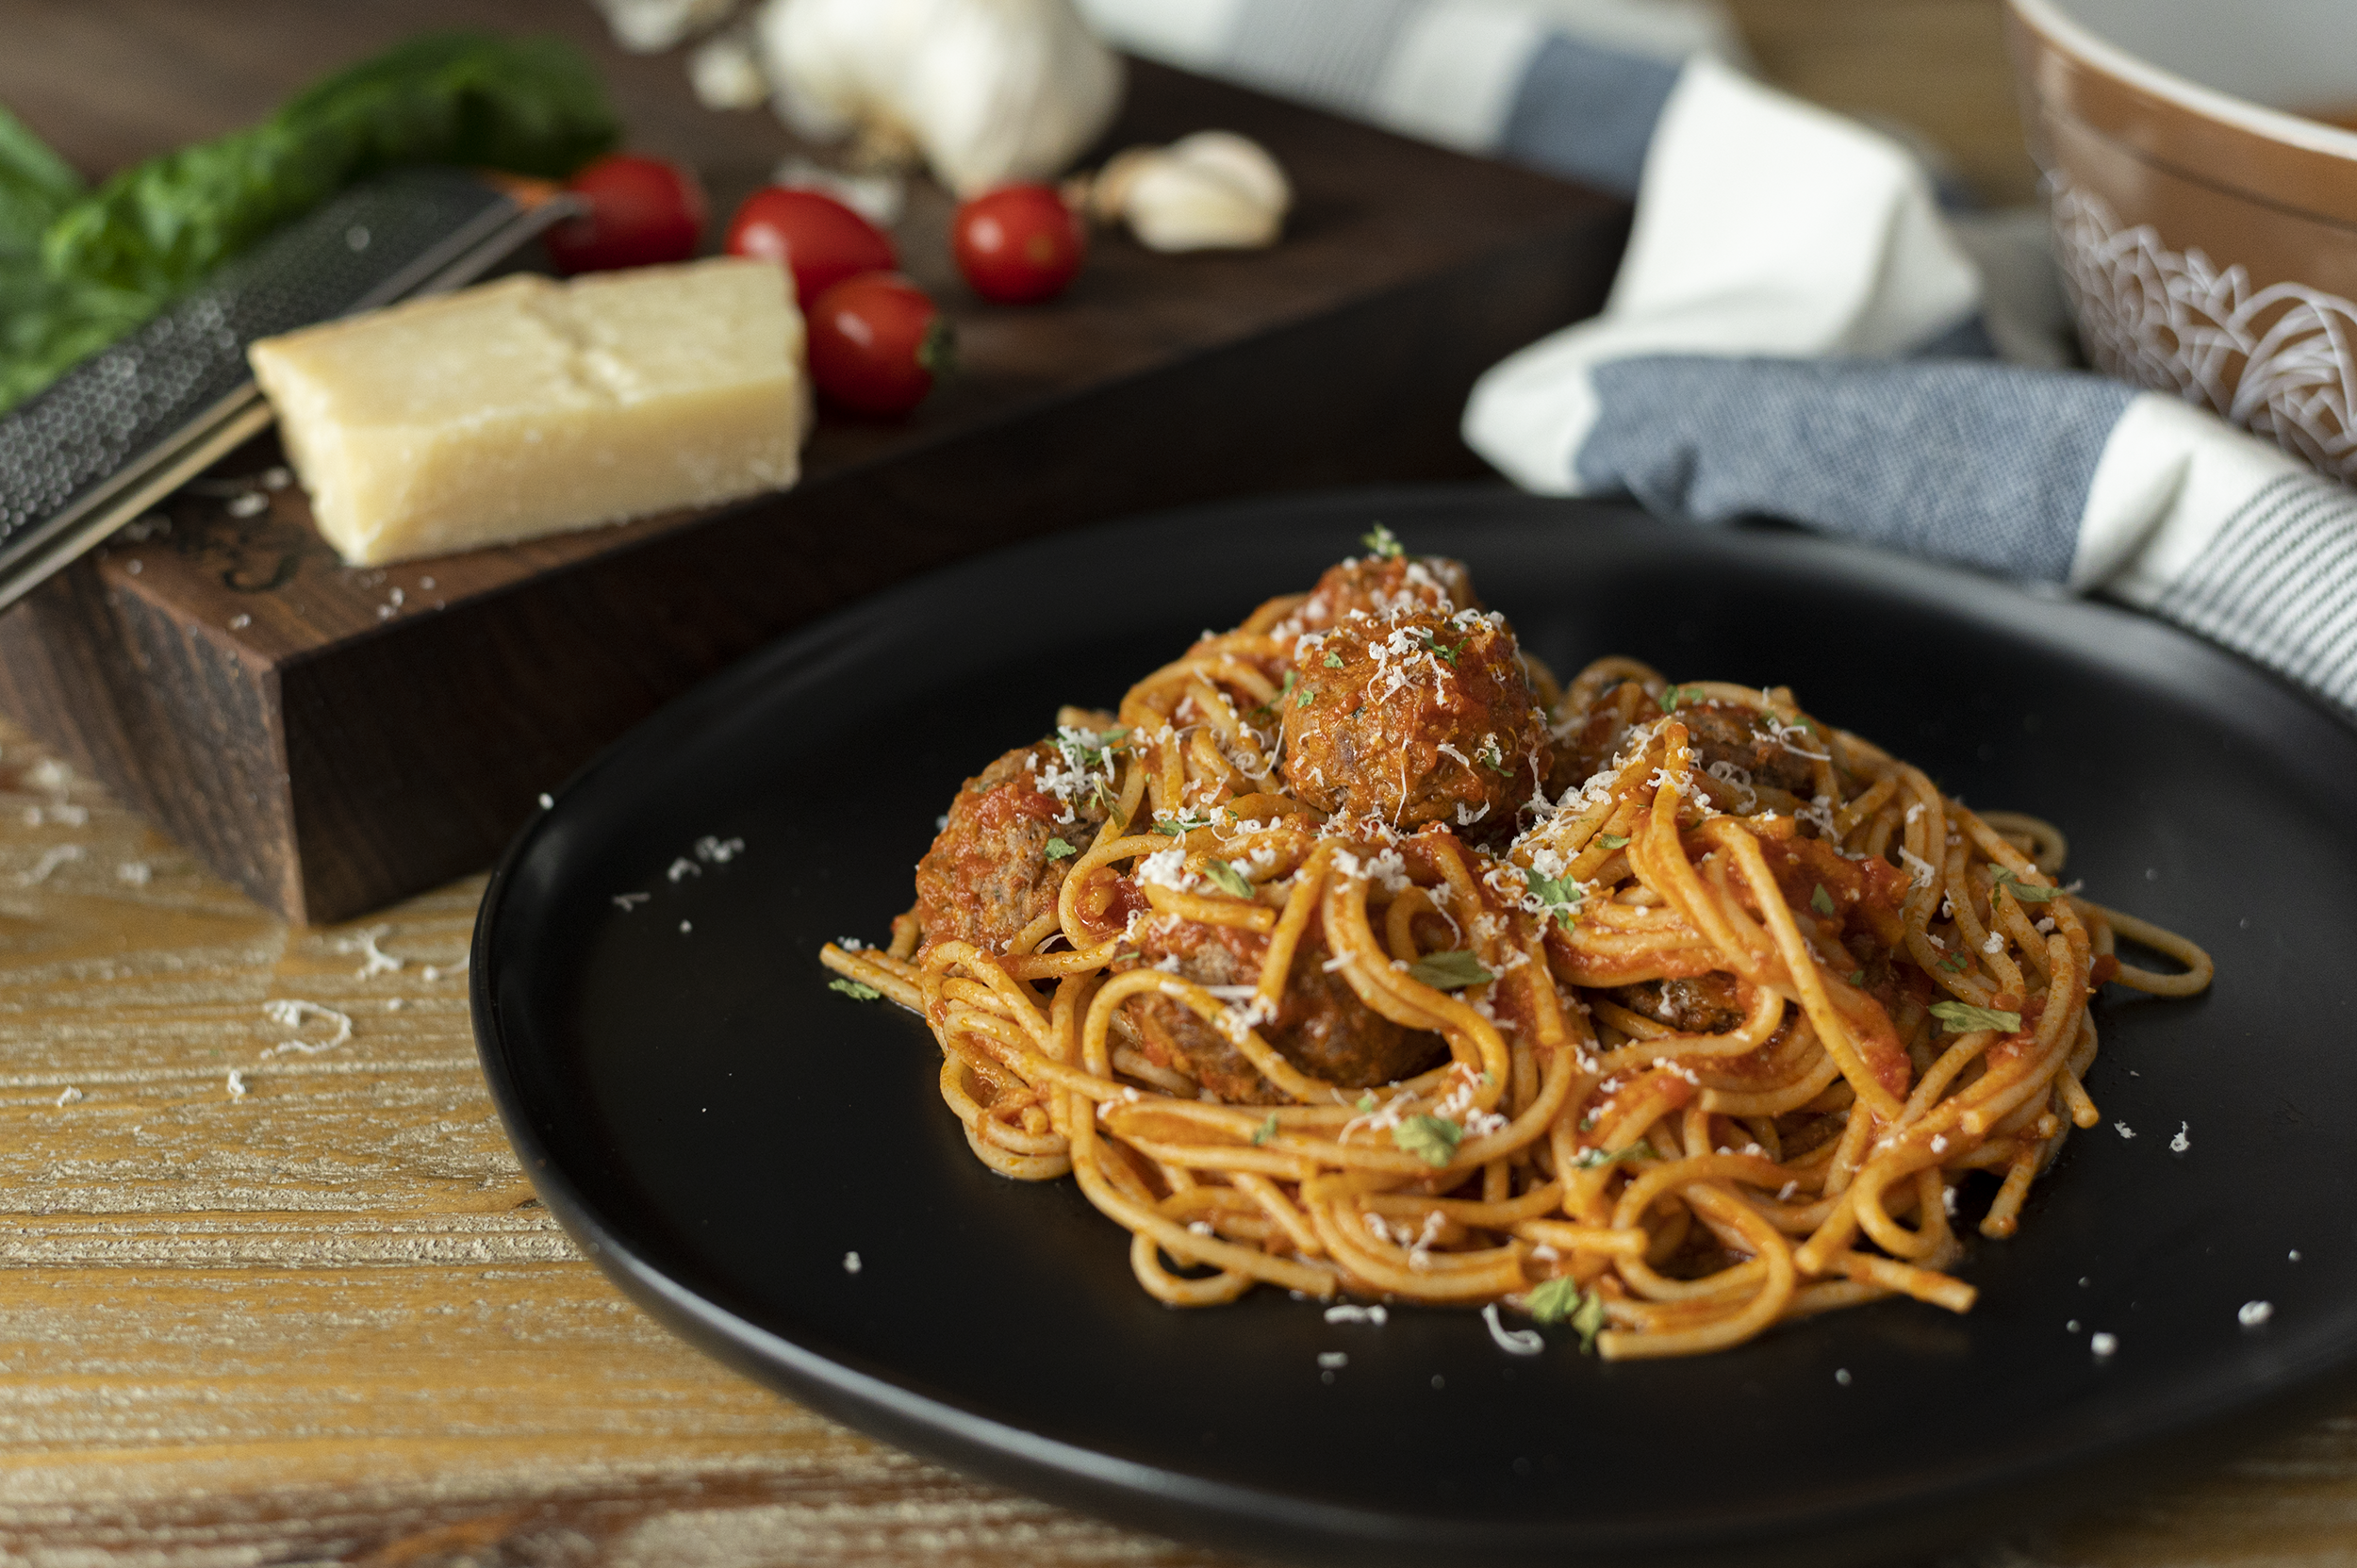 spaghetti and meatballs on a black plate on a wood table with cheese and vegetables in the background